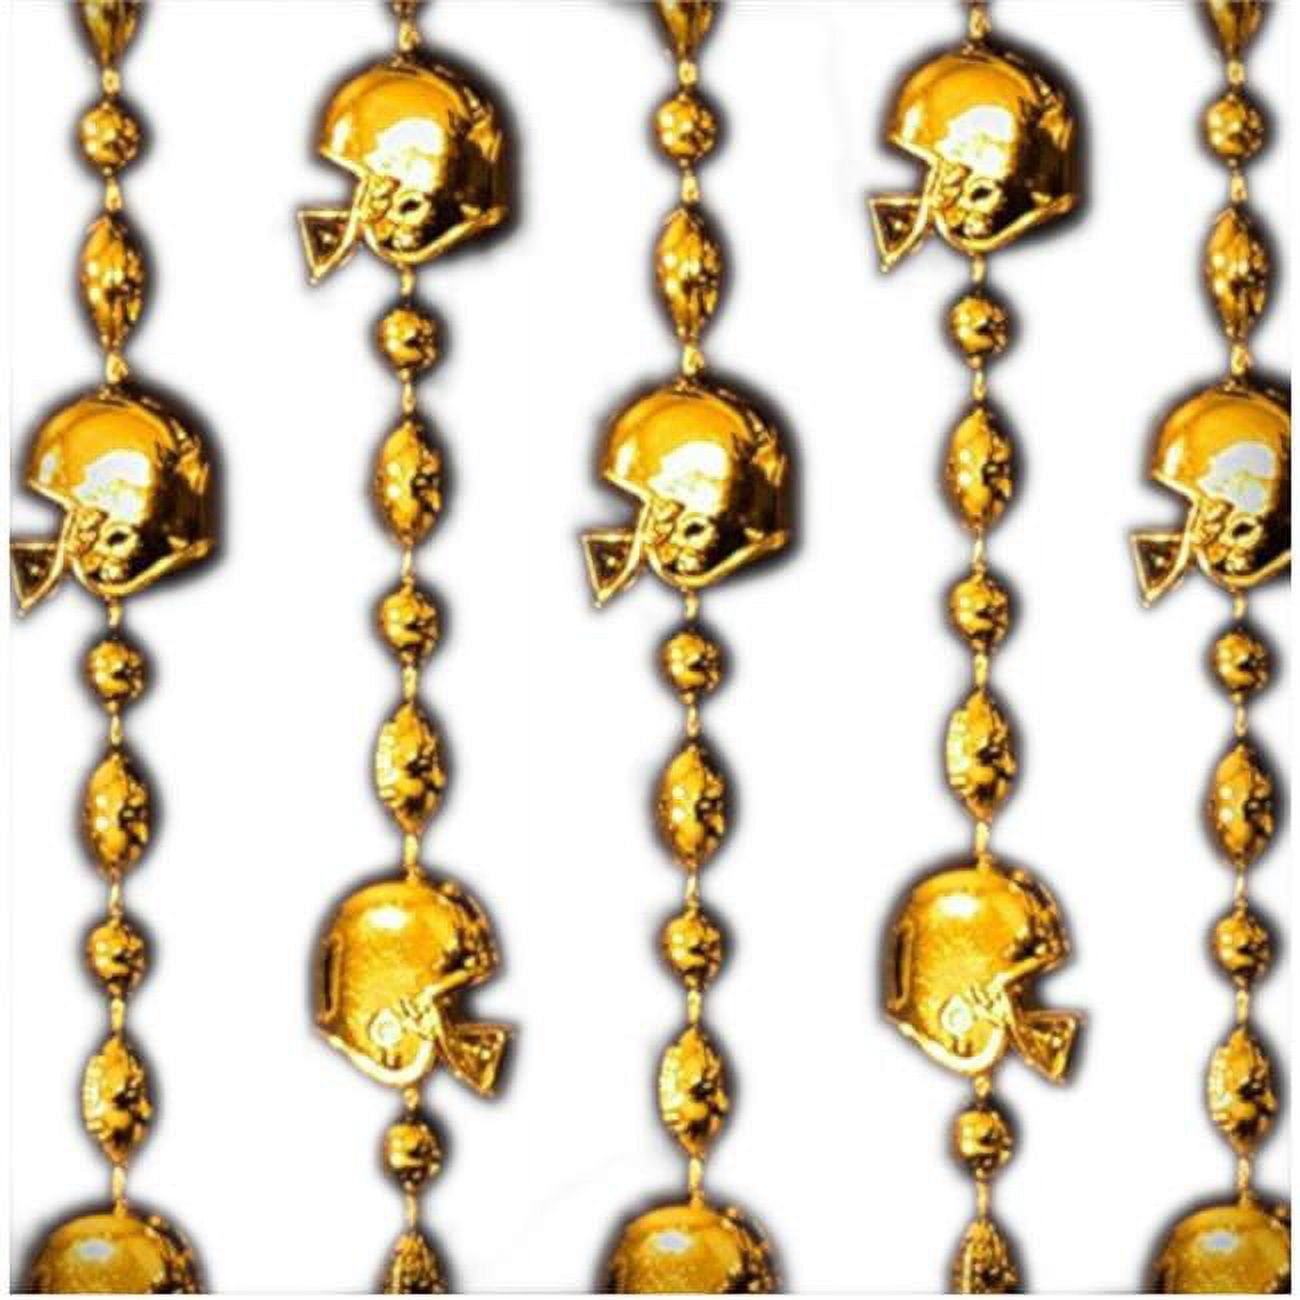 165900 Football Helmet Bead Necklaces, Gold - Pack Of 12